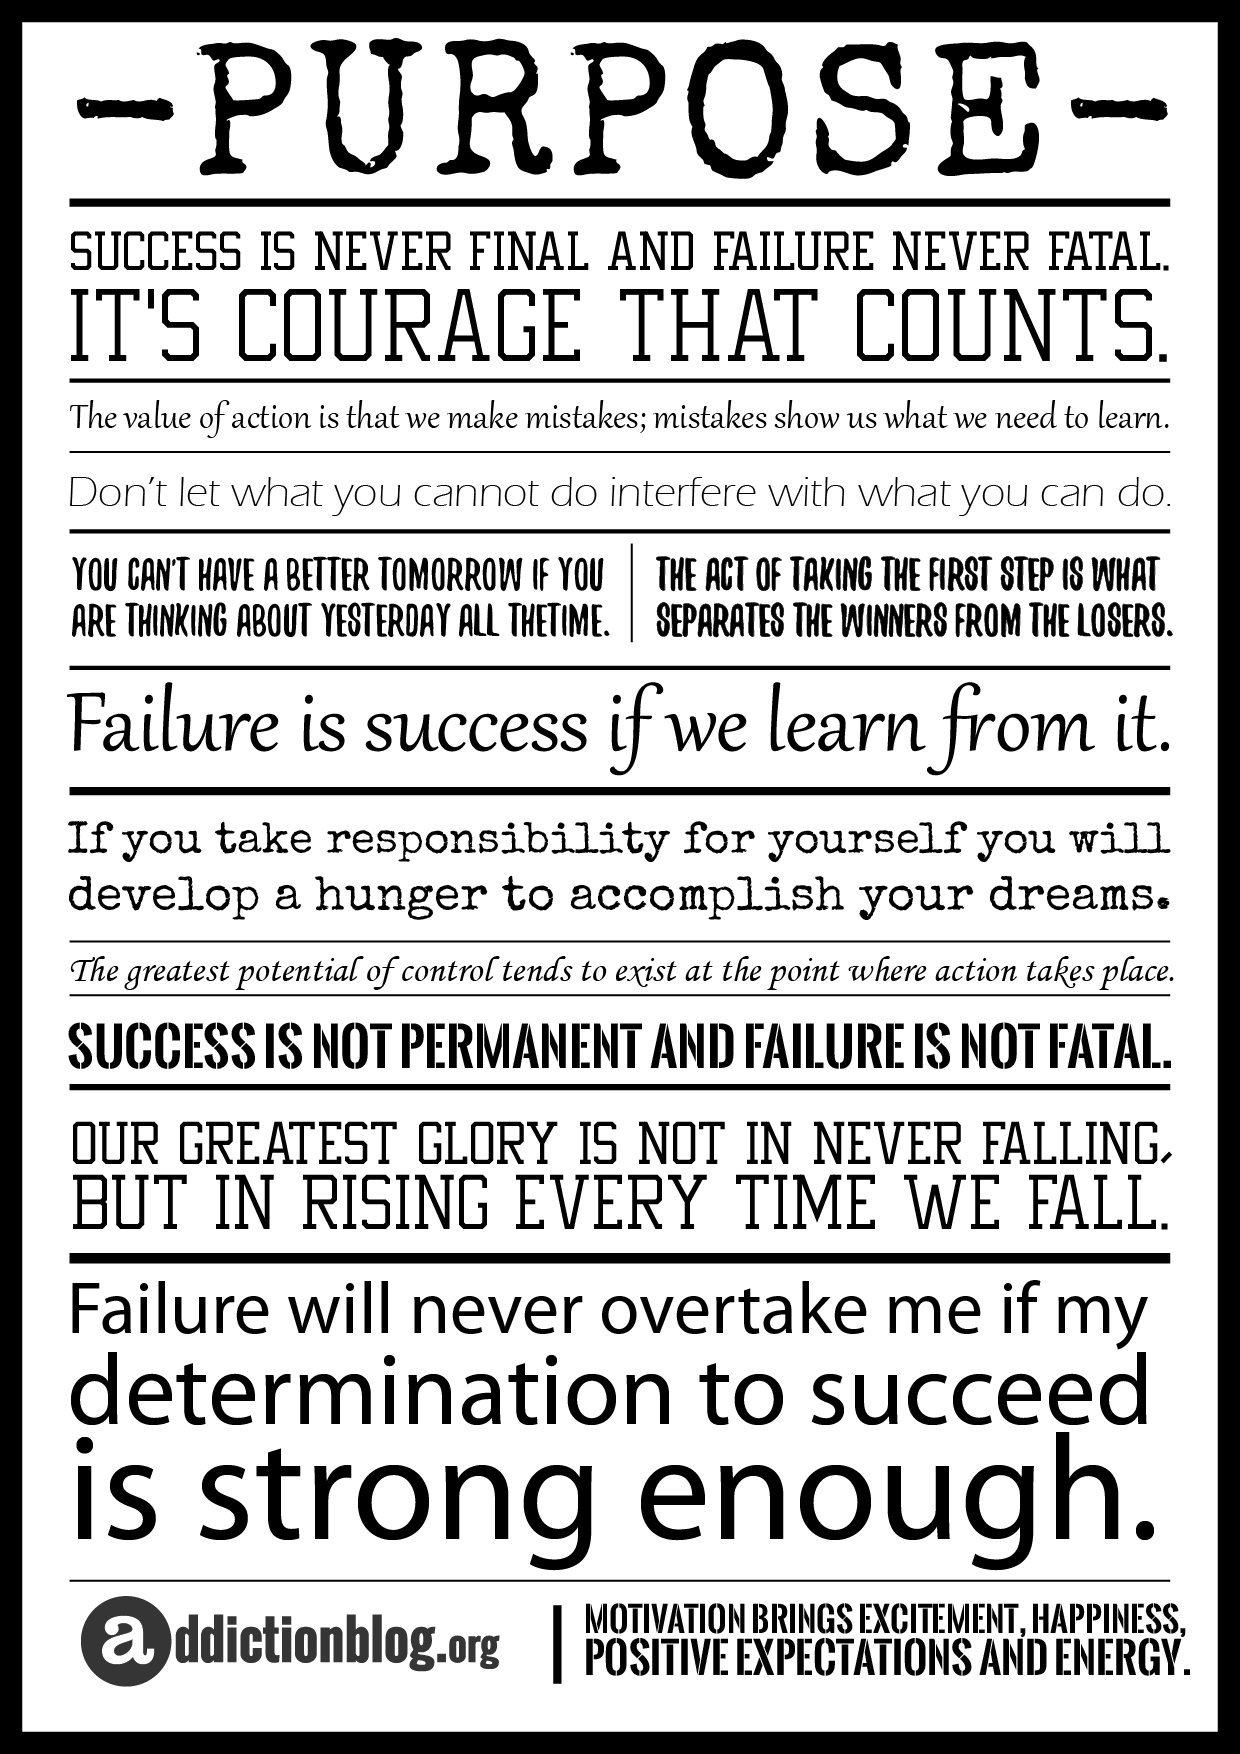 Addiction Quotes on Your Purpose in Addiction Recovery [POSTER]